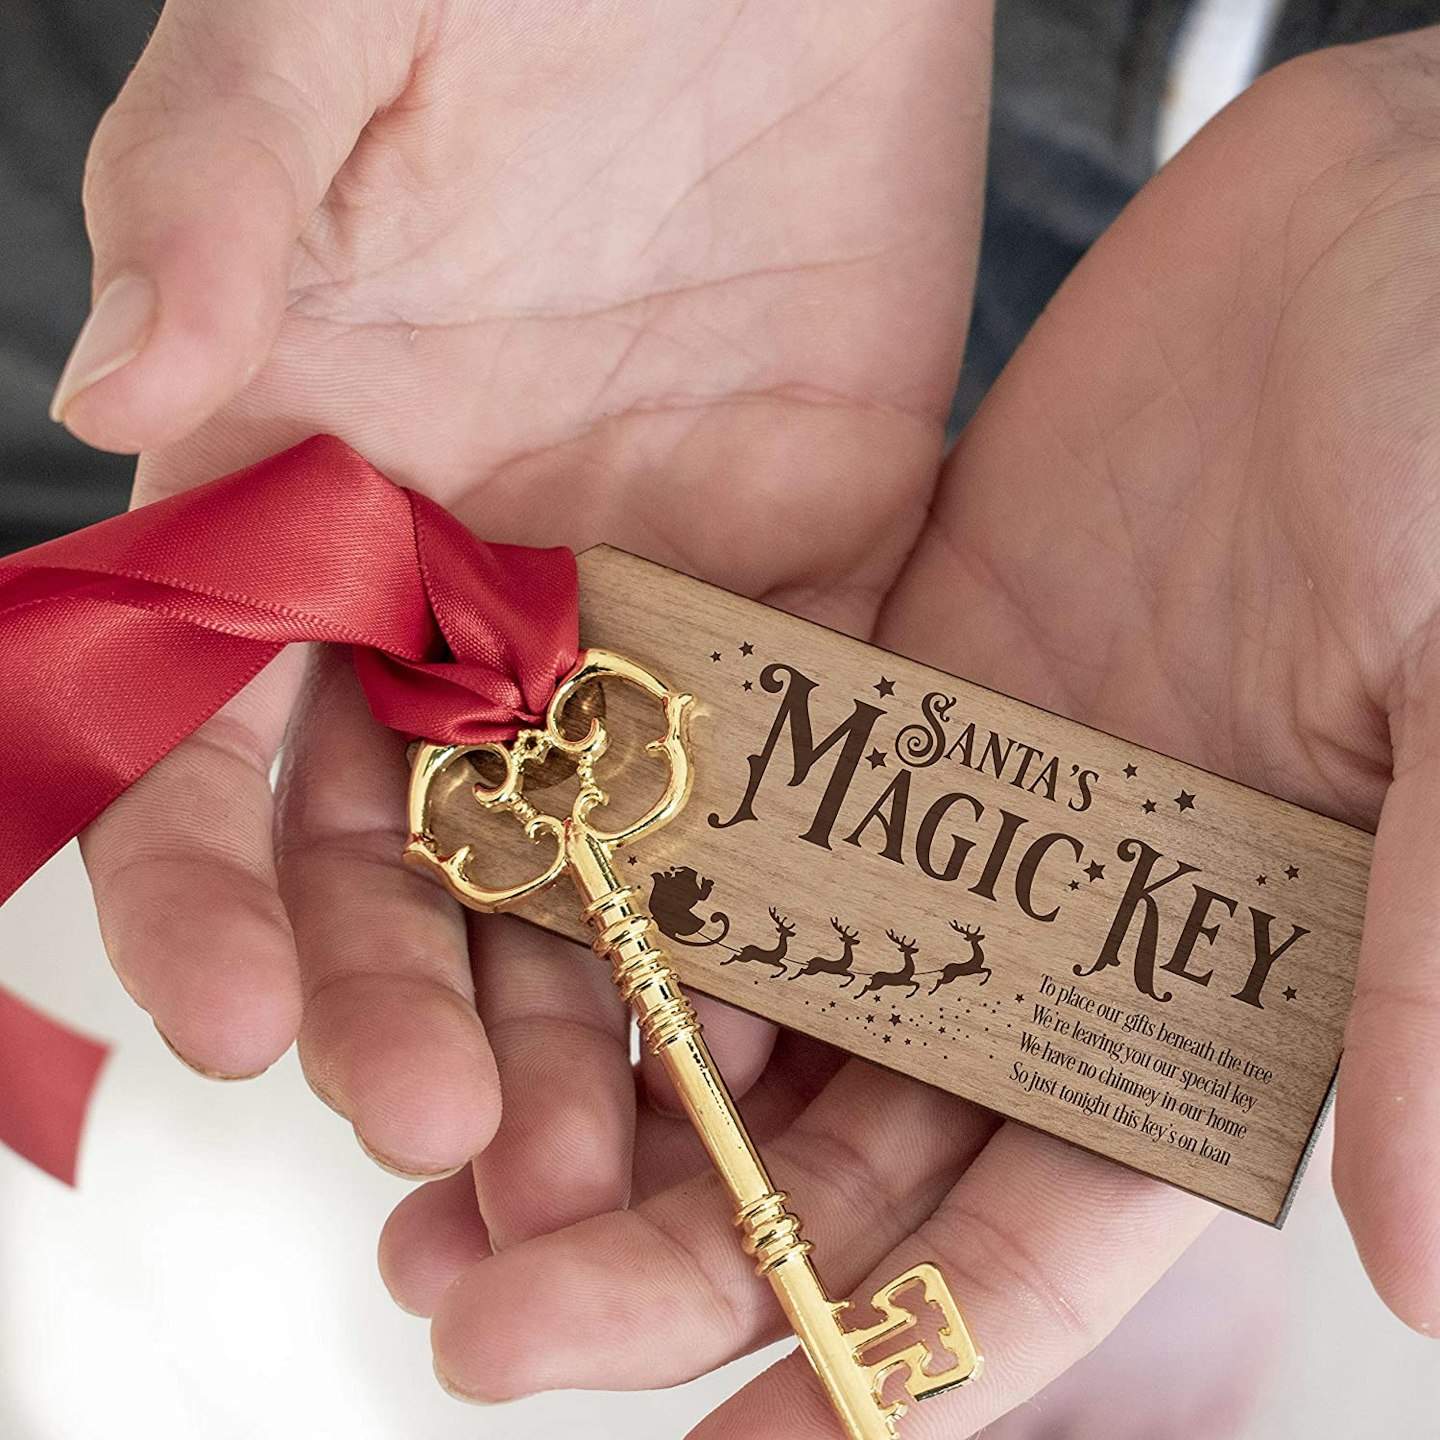 8 magical Santa keys for families without chimneys